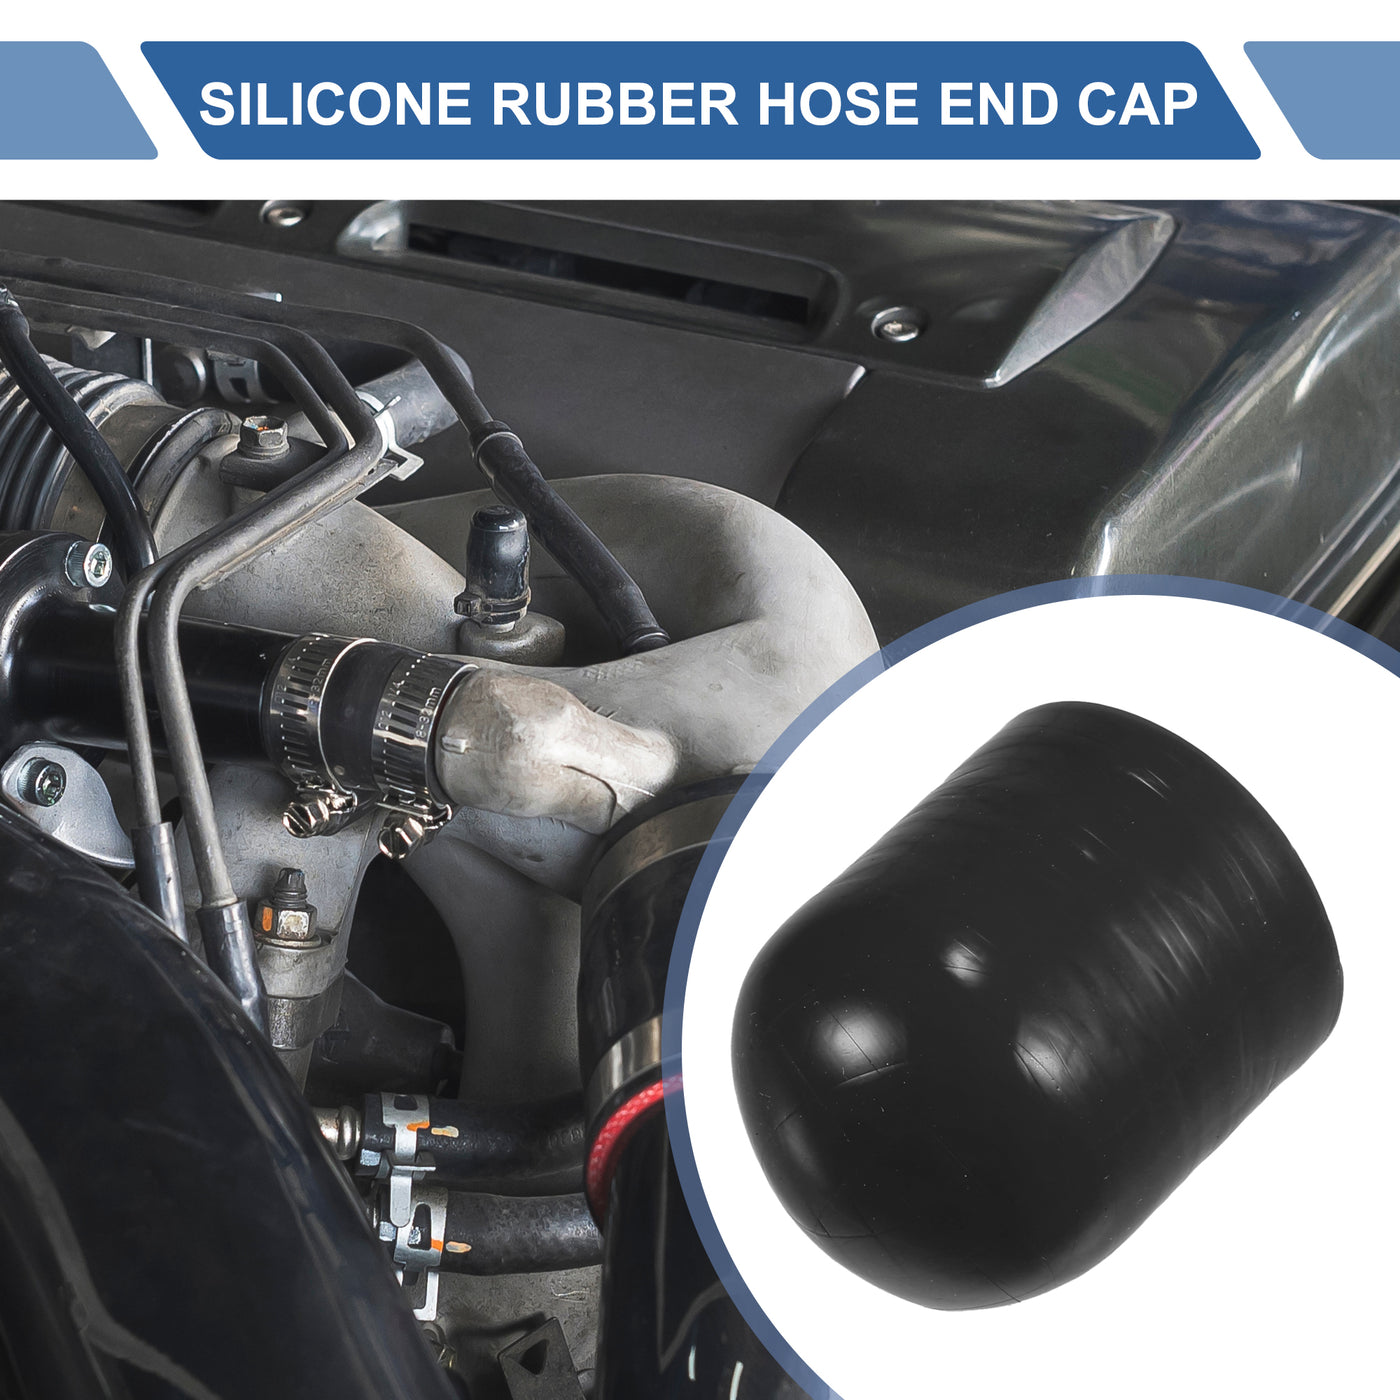 X AUTOHAUX 1 Set 30mm Length 30mm/1.18" ID Black Car Silicone Rubber Hose End Cap with Clamps Silicone Reinforced Blanking Cap for Bypass Tube Universal